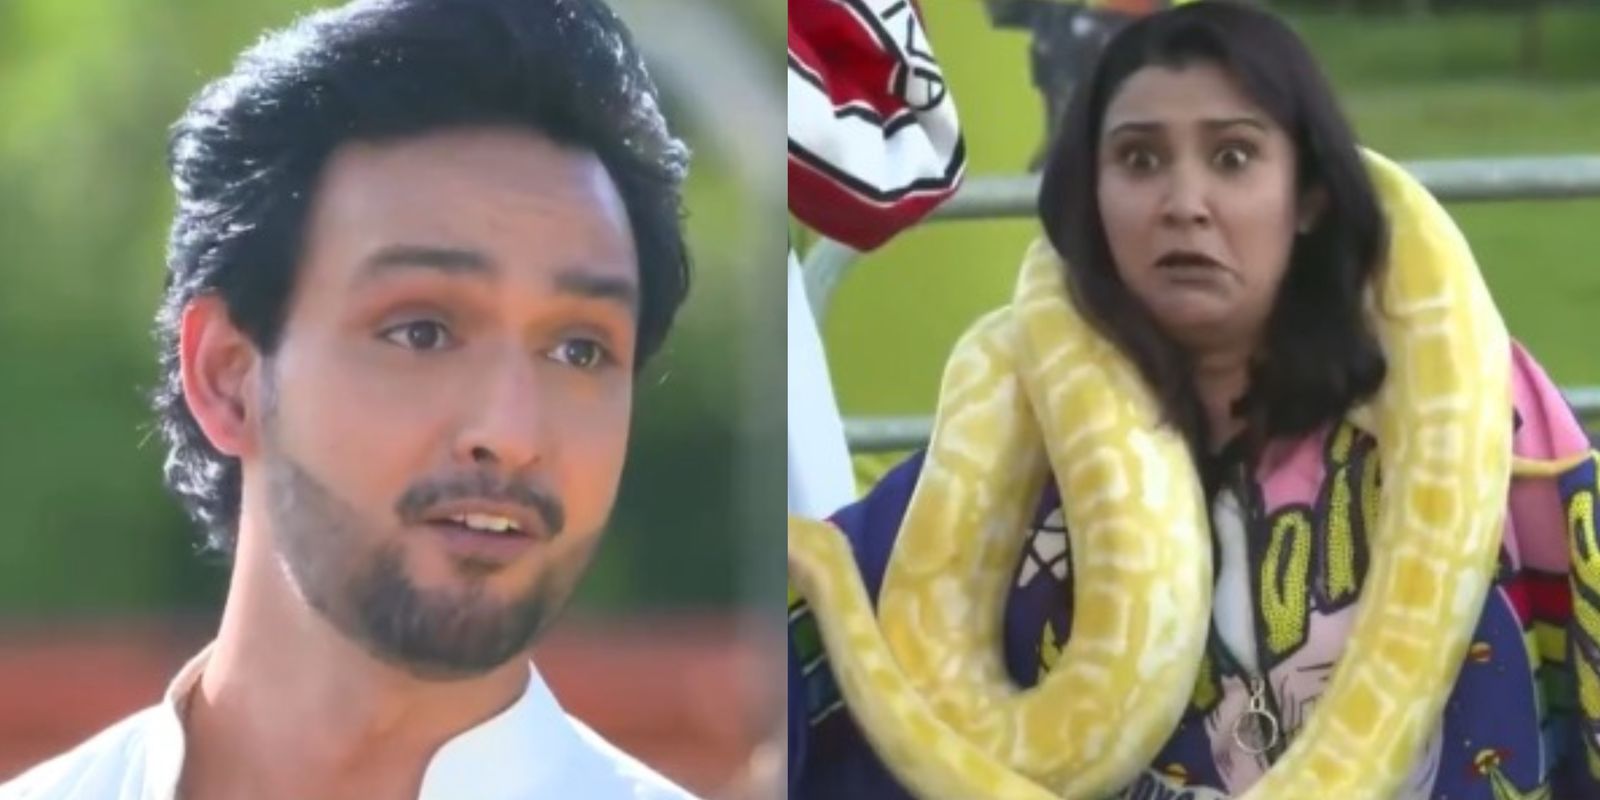 Khatron Ke Khiladi 11 Promo: Here’s a brief but exciting glimpse at Sourabh Raaj Jain and Aastha Gill’s journey